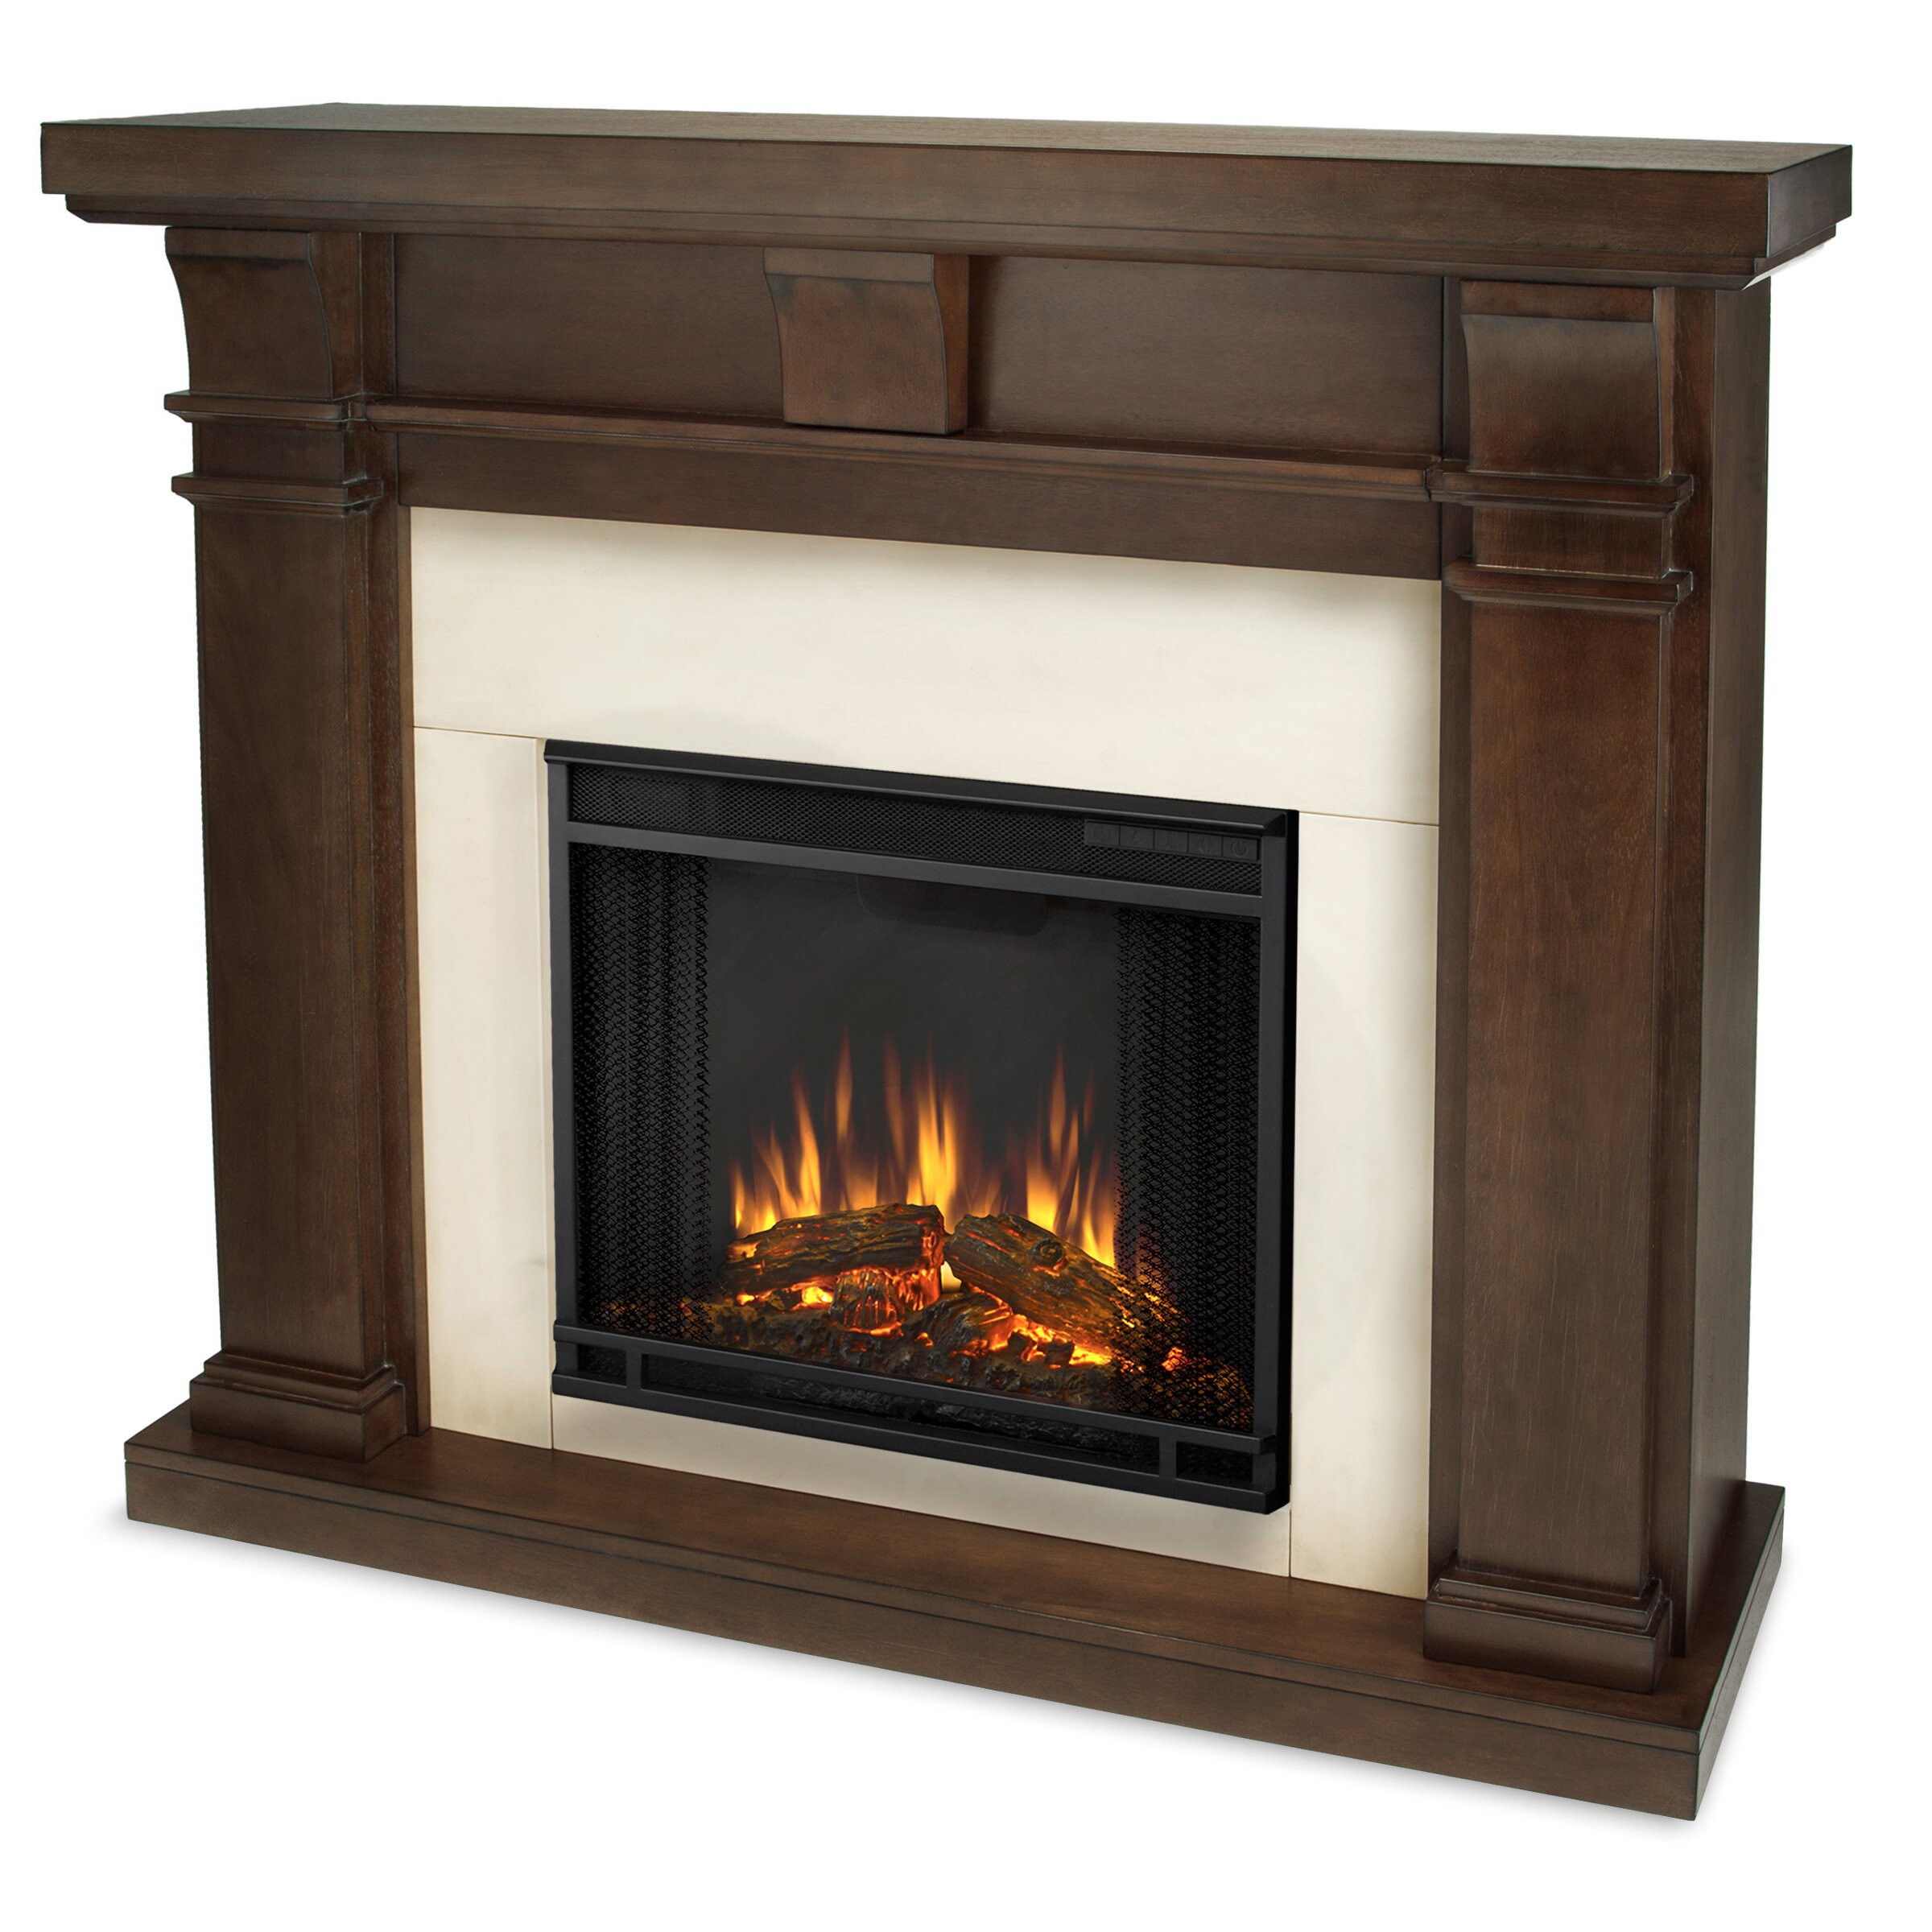 Real Flame Electric Fireplace Reviews
 Real Flame Porter Electric Fireplace & Reviews